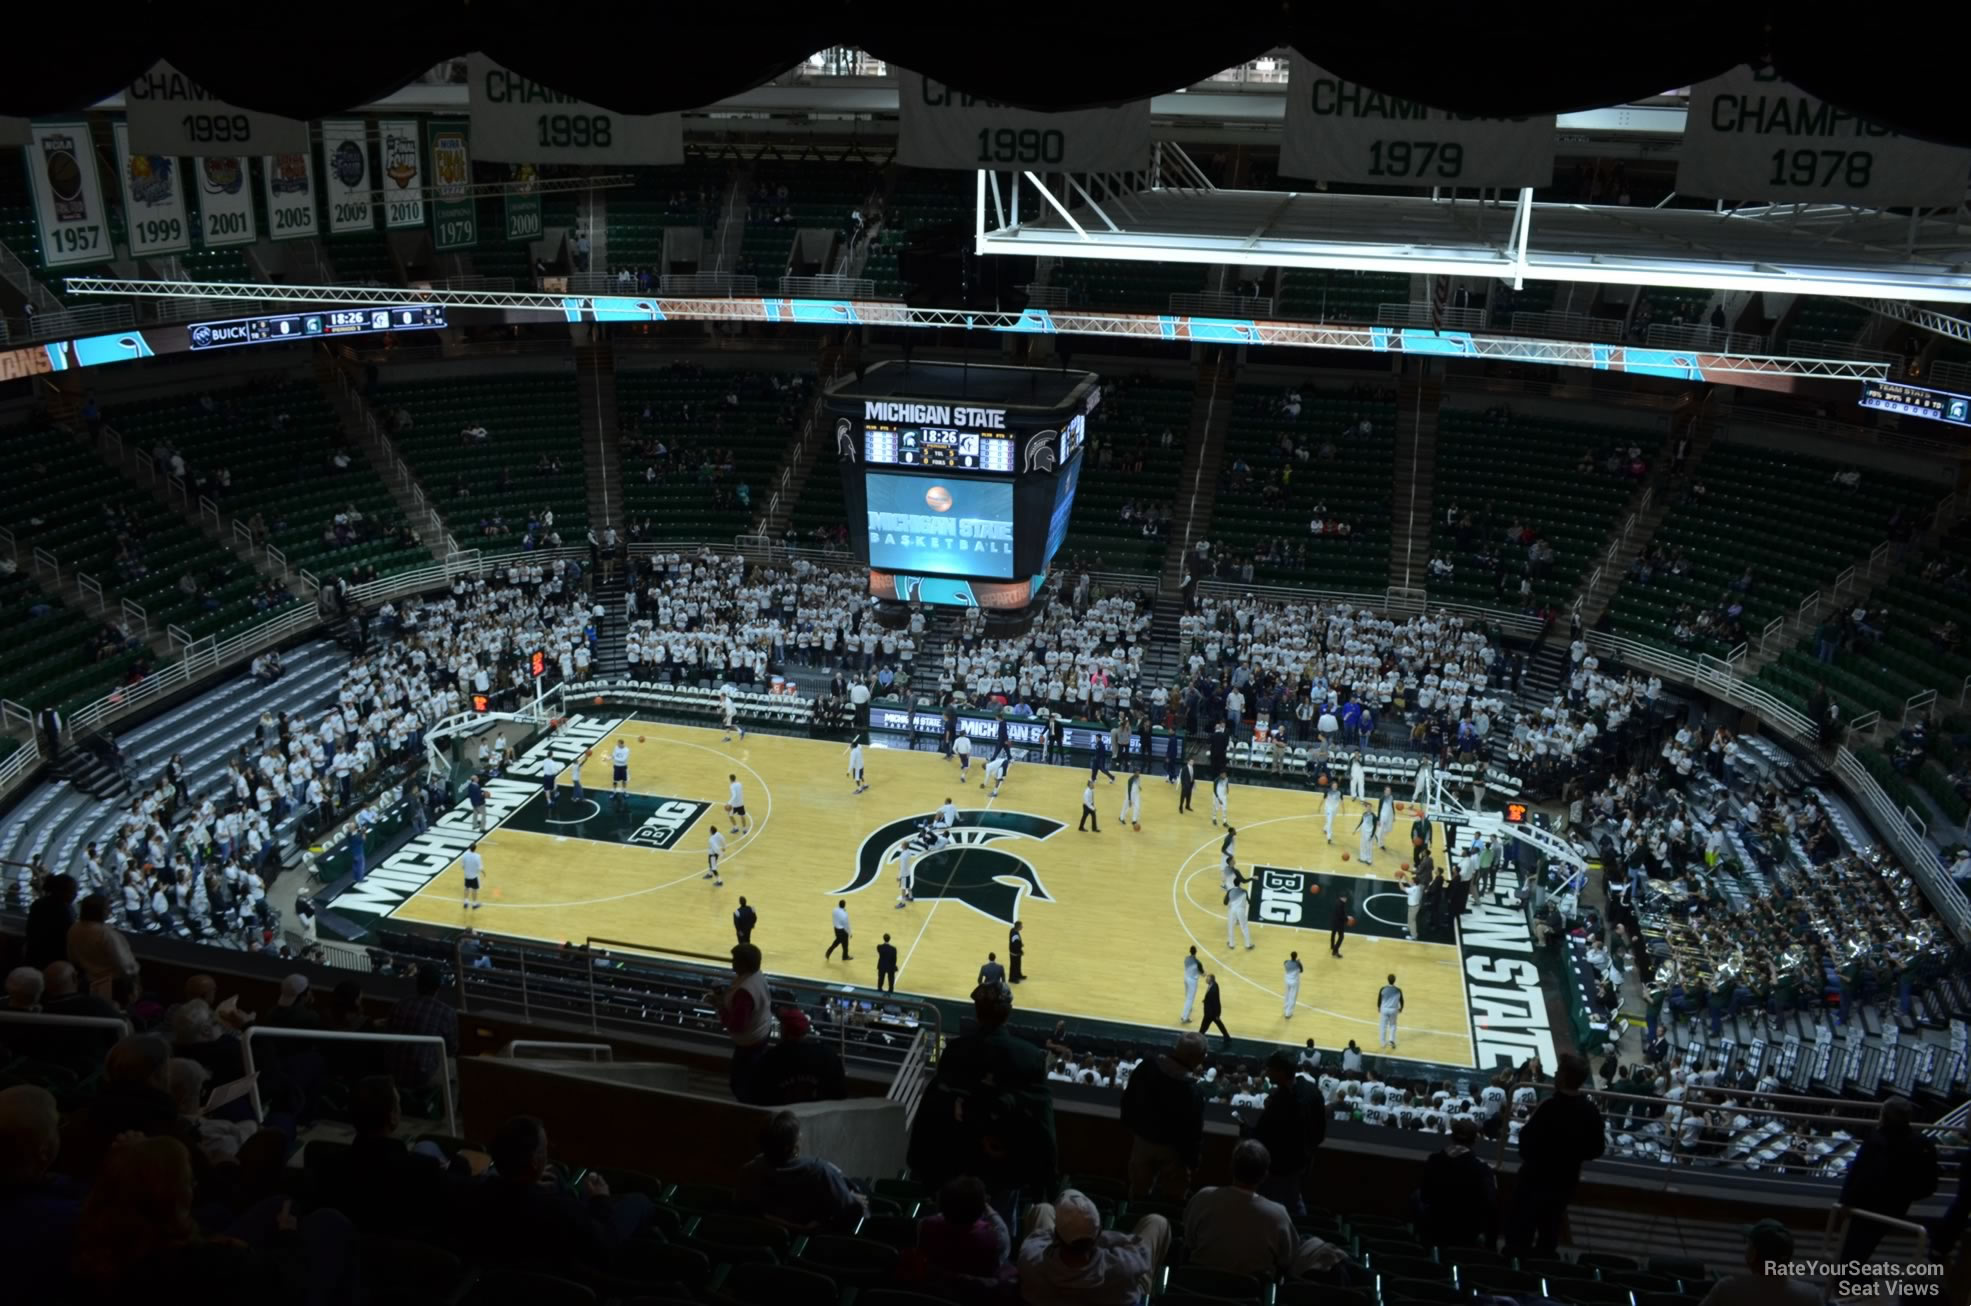 section 226, row 15 seat view  - breslin center